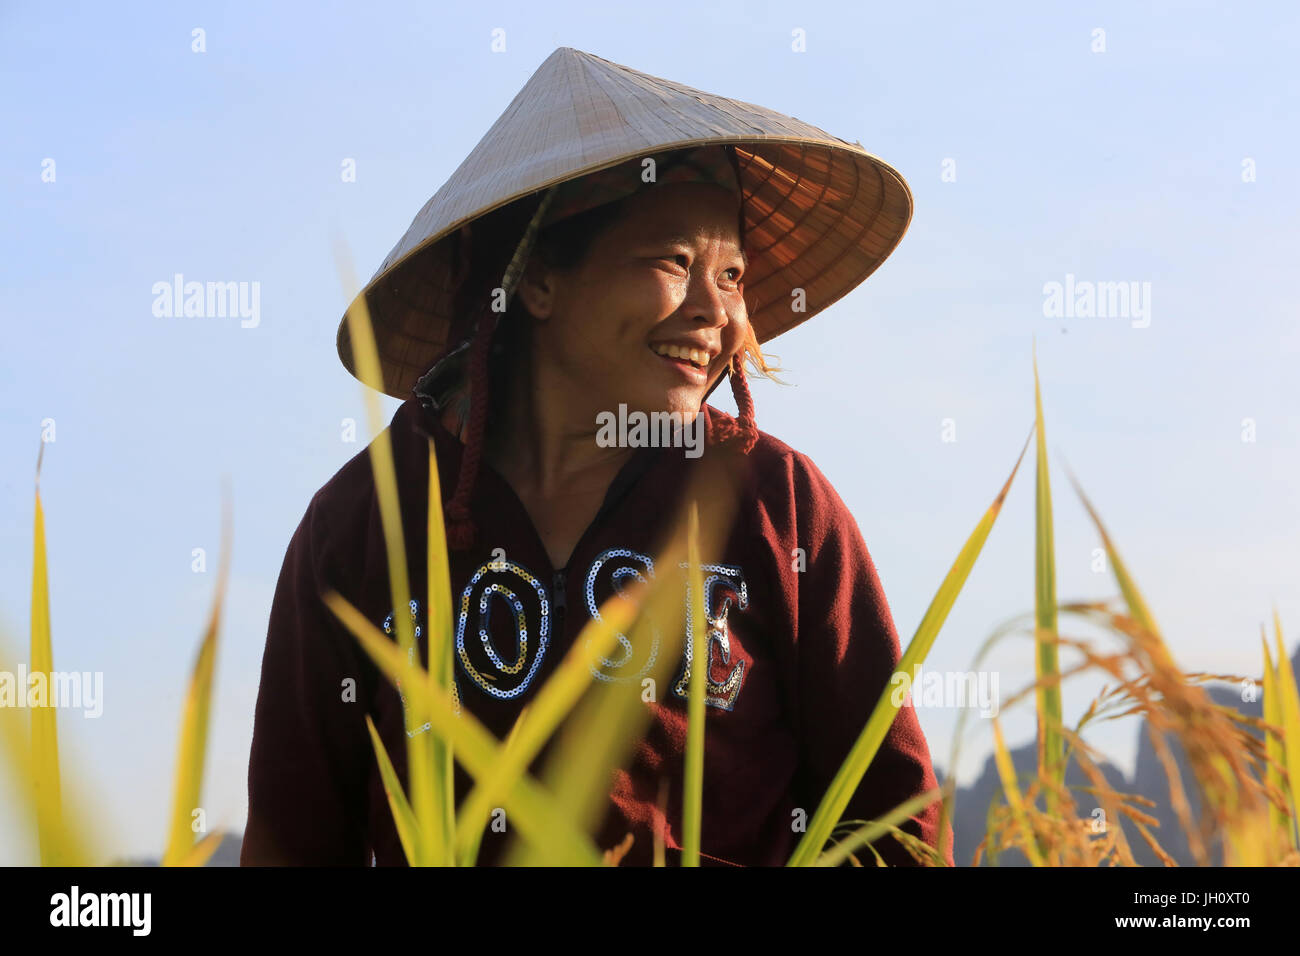 Lao armer wearing traditional hat and working in rice fields in rural landscape. Laos. Stock Photo